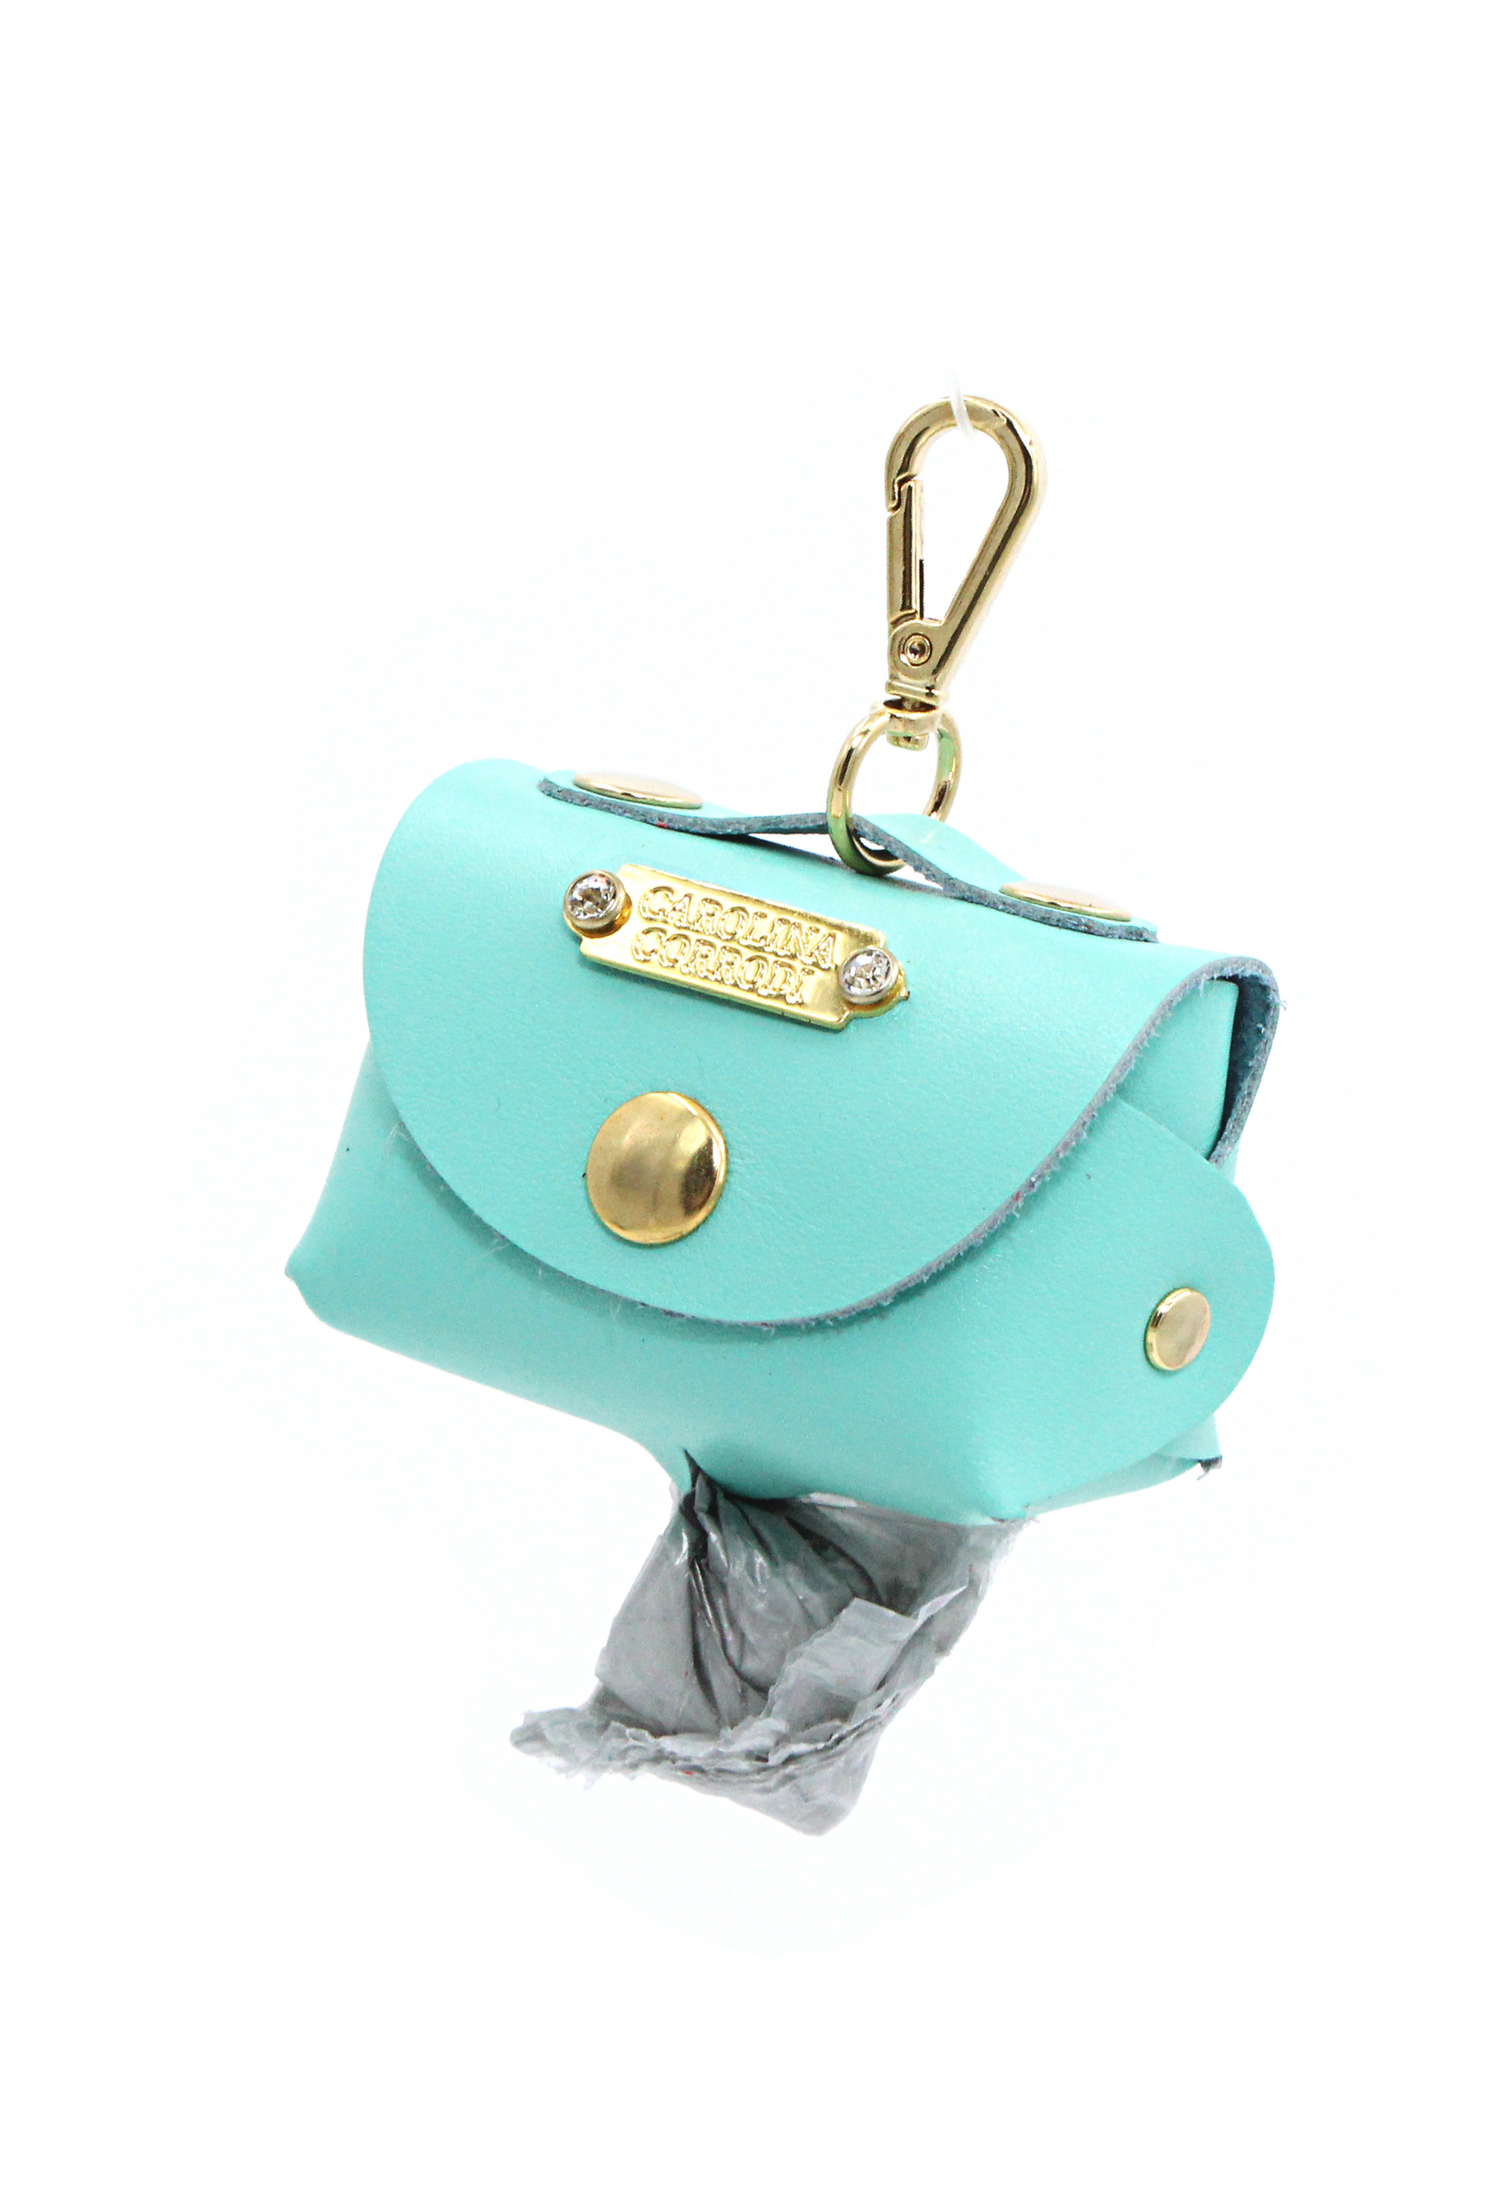 Turquoise poop bag dispenser with crystals Gold Edition/ Popo Bag